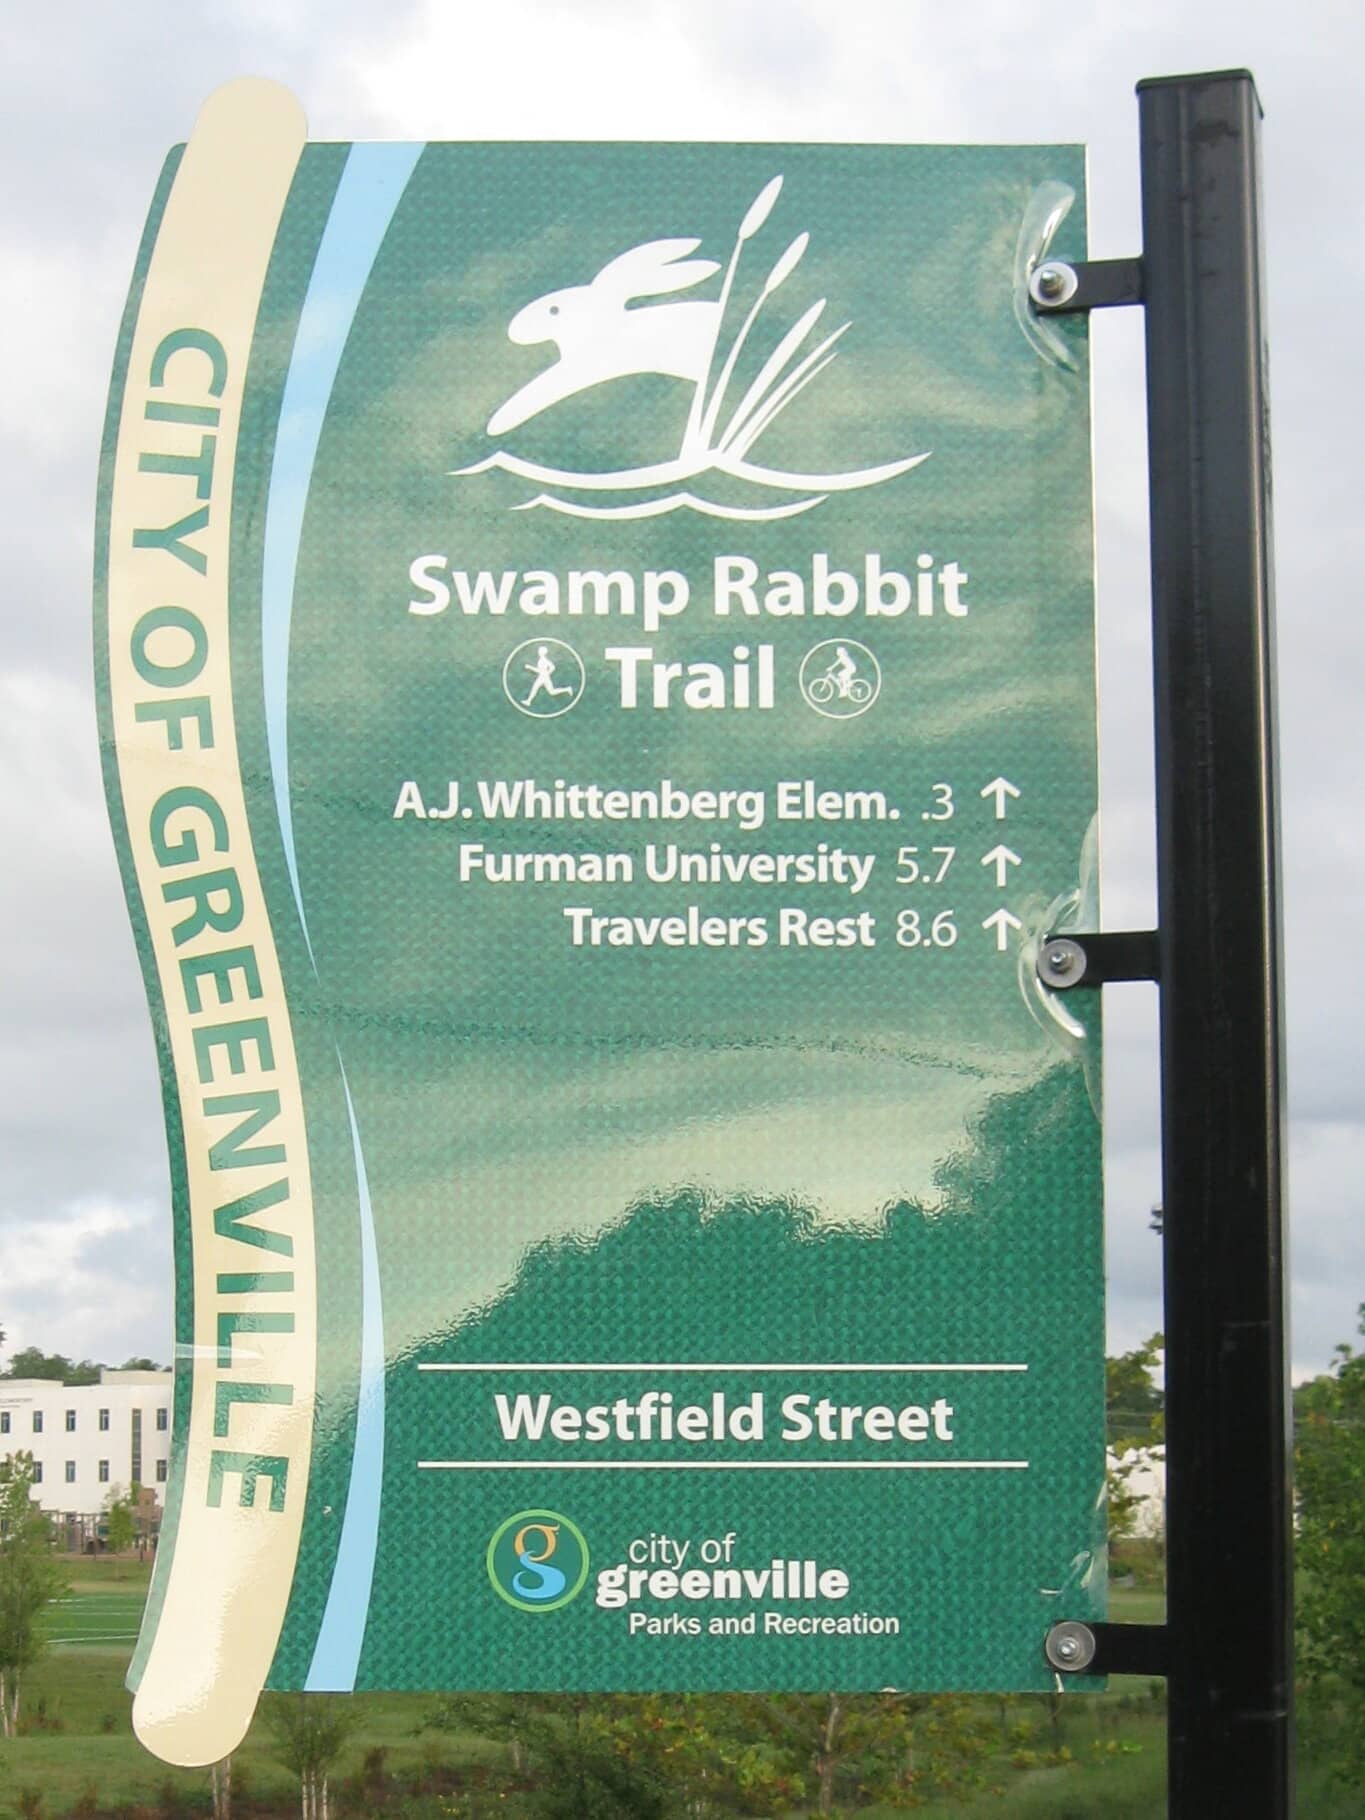 Swamp Rabbit welcomes downtown Greenville visitors / Credit: John Foxe, Wikipedia